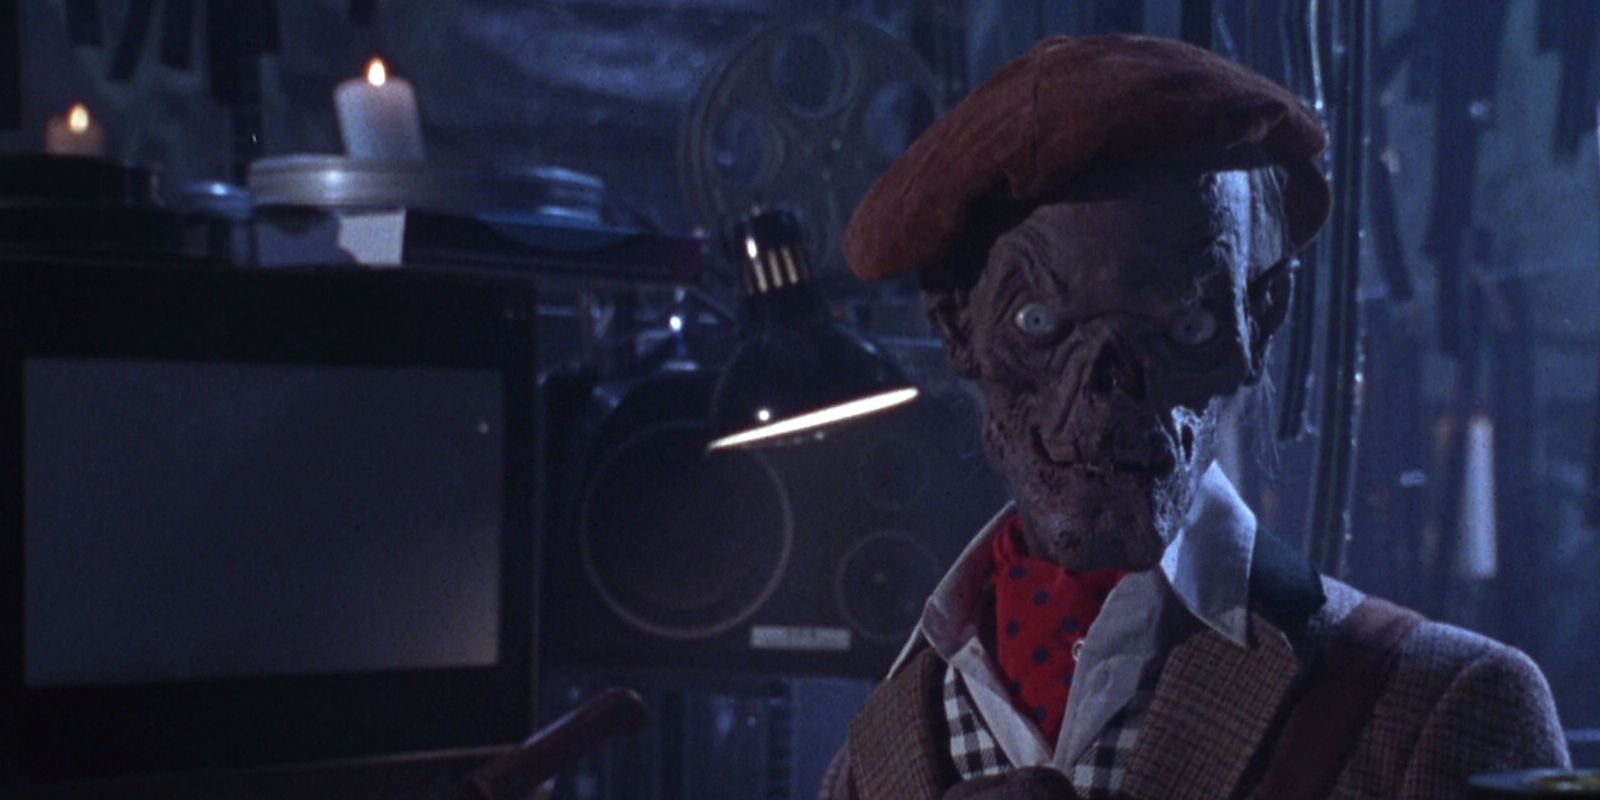 Tales From the Crypt Presents Demon Knight